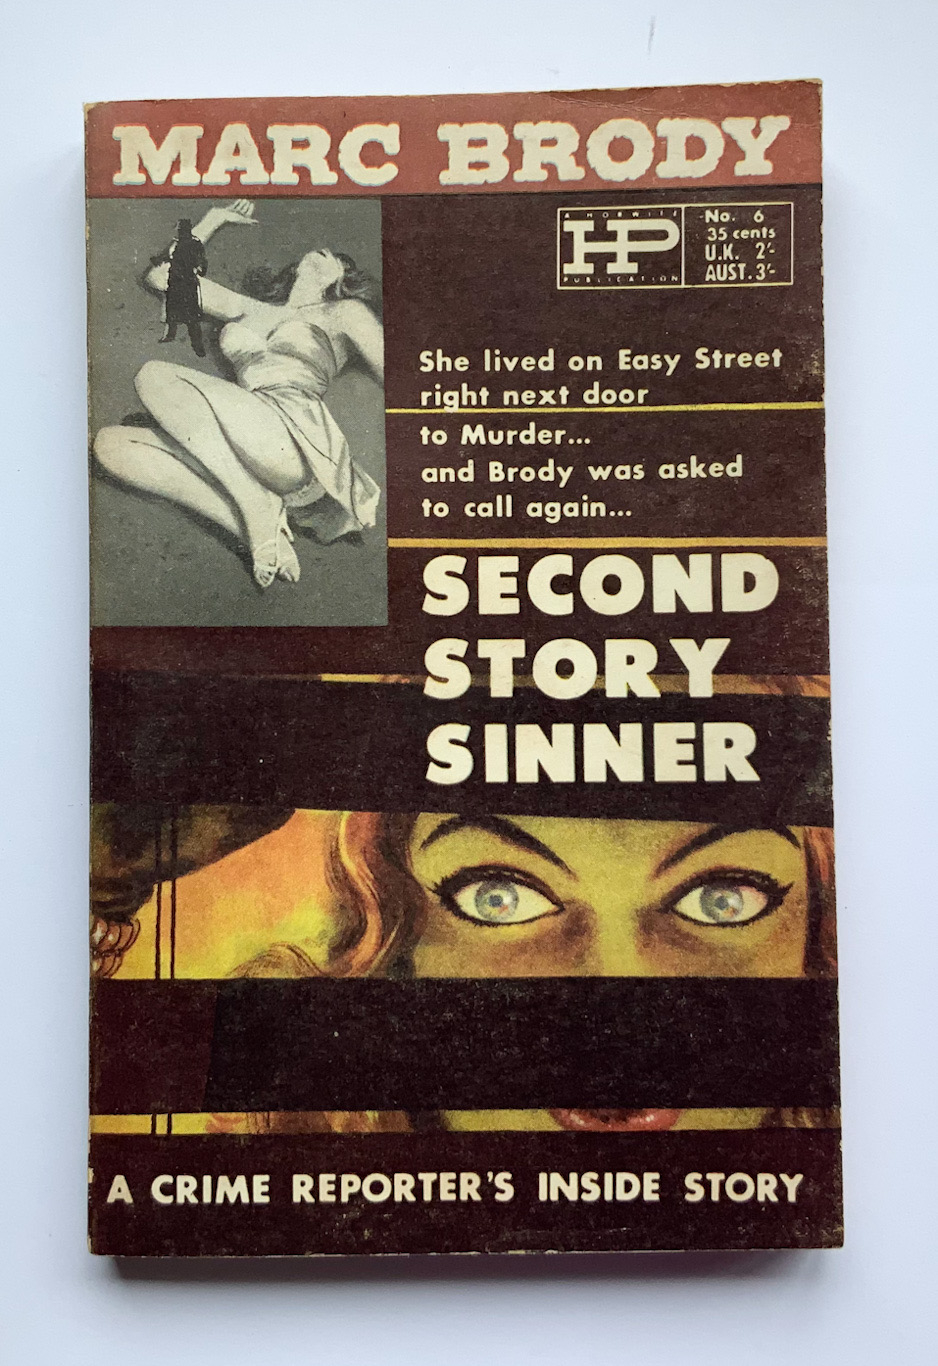 SECOND STORY SINNER Australian crime pulp fiction book by Marc Brody 1958